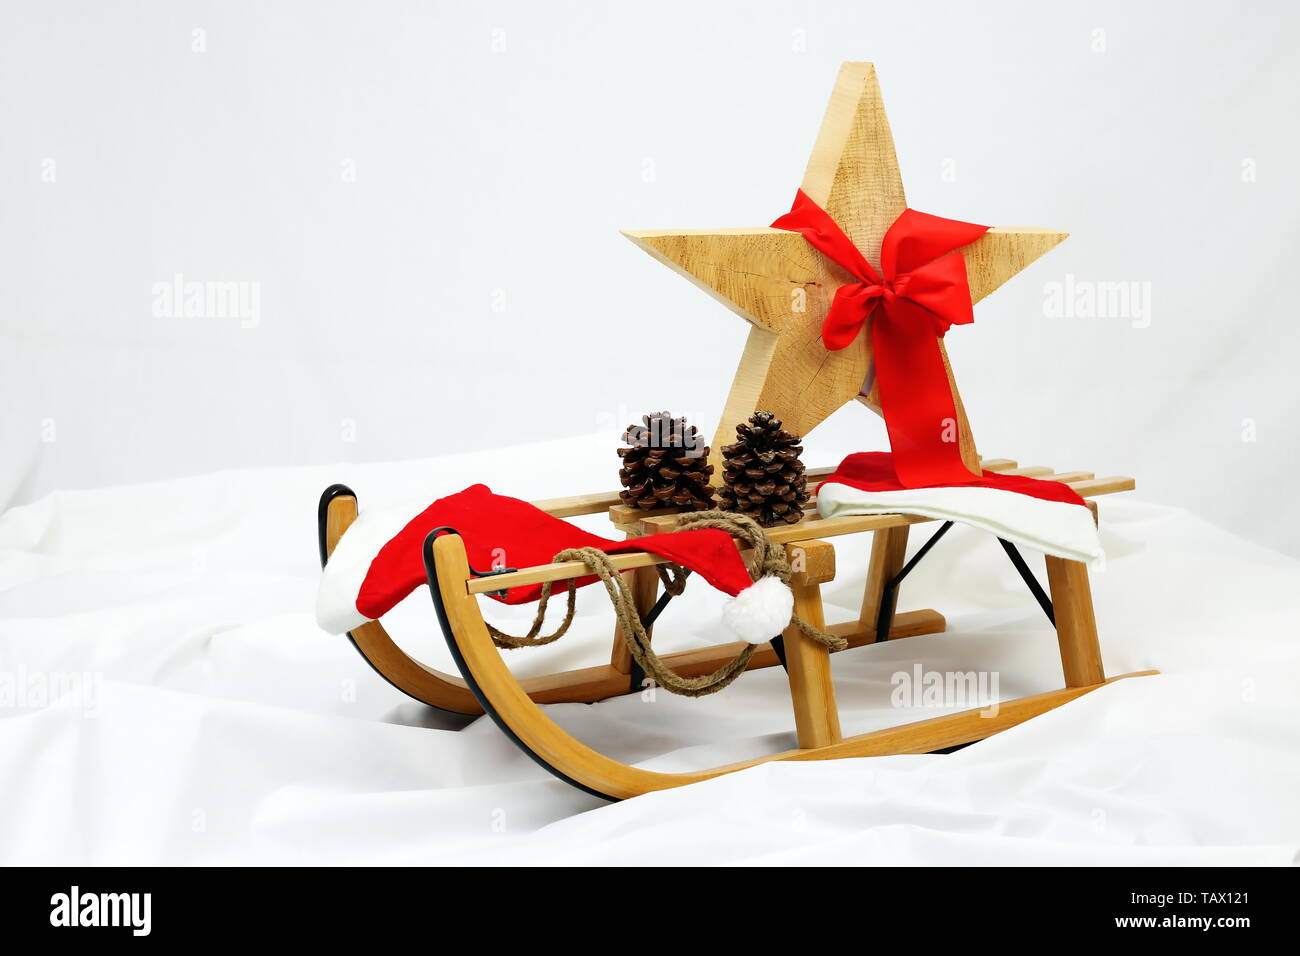 Christmas star decoration with red bow on a sledge Stock Photo